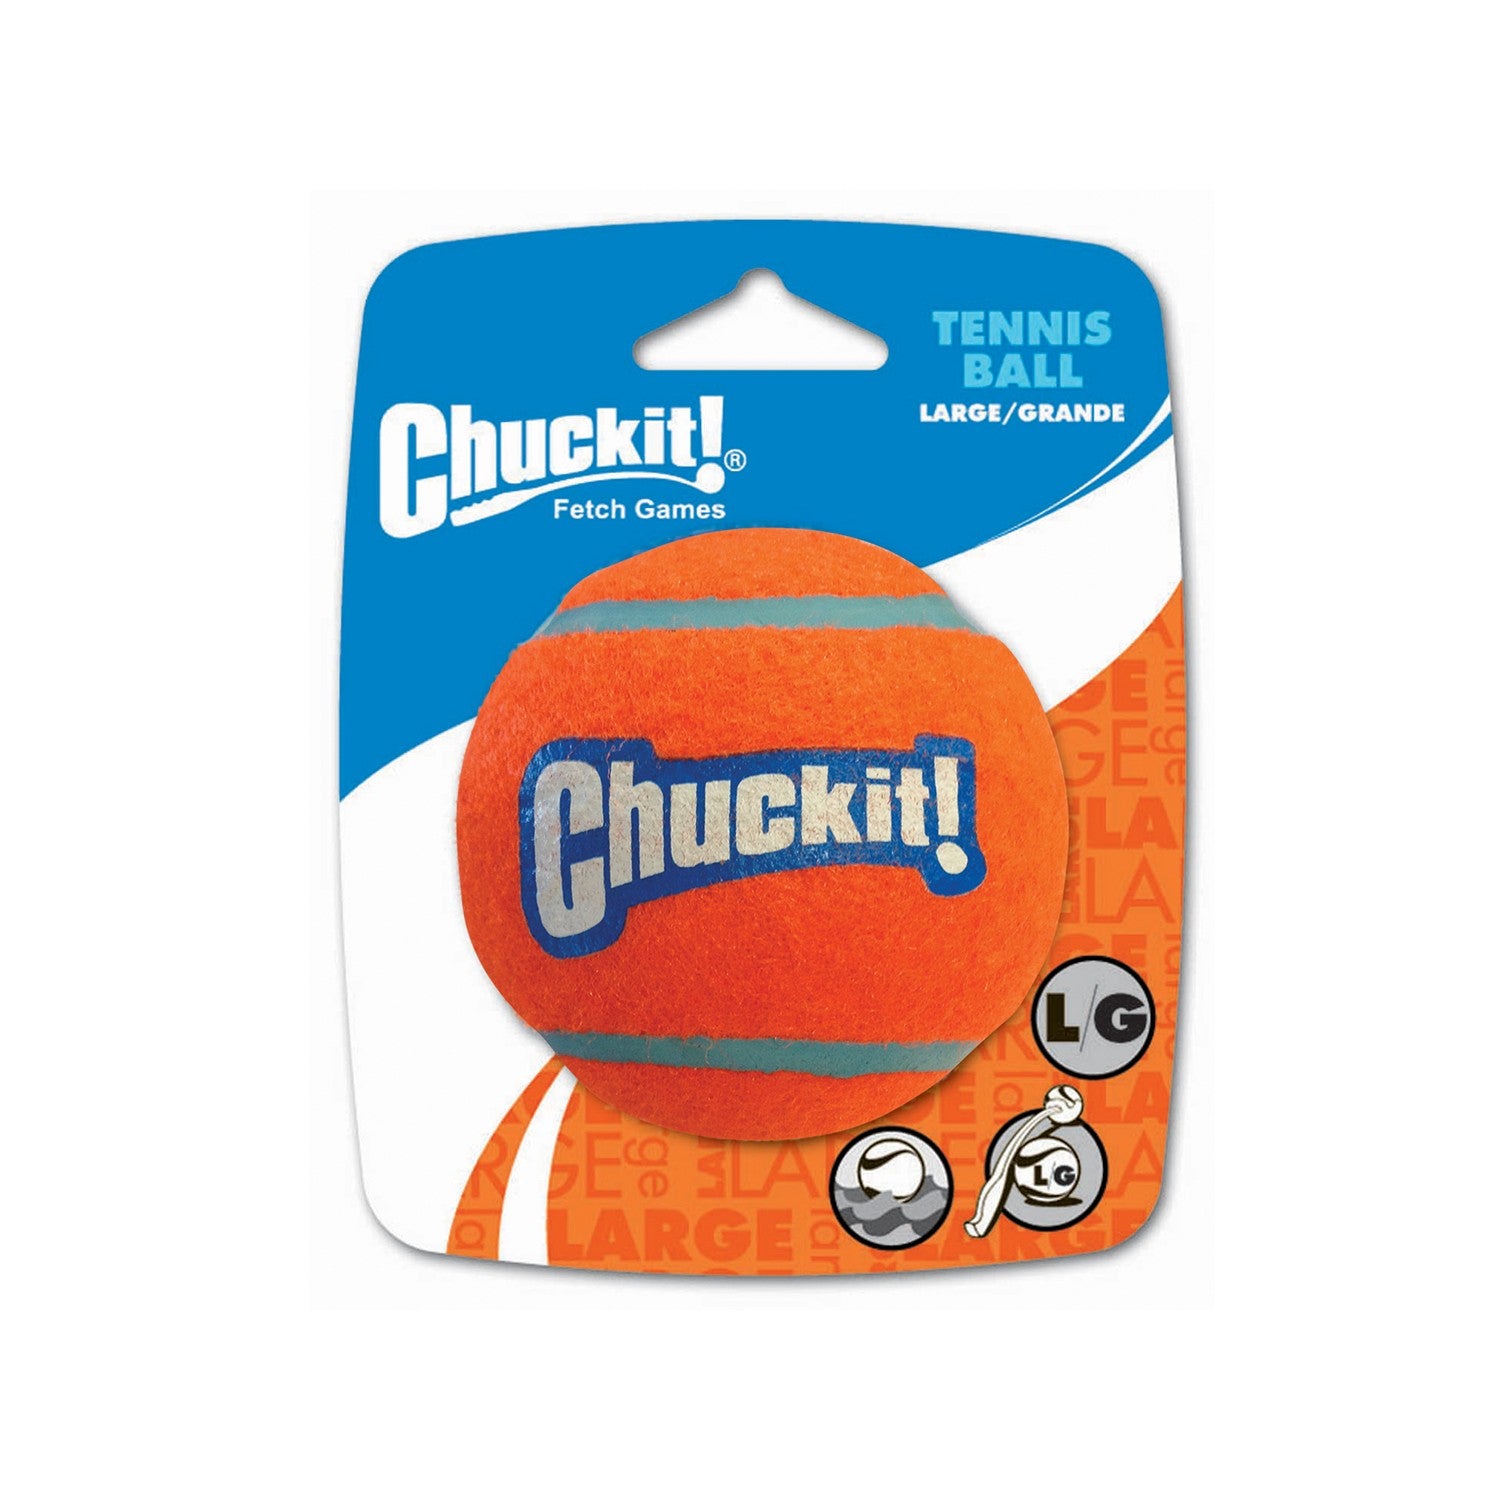 Chuckit! Double Pack Tennis Ball - Mutts & Co.